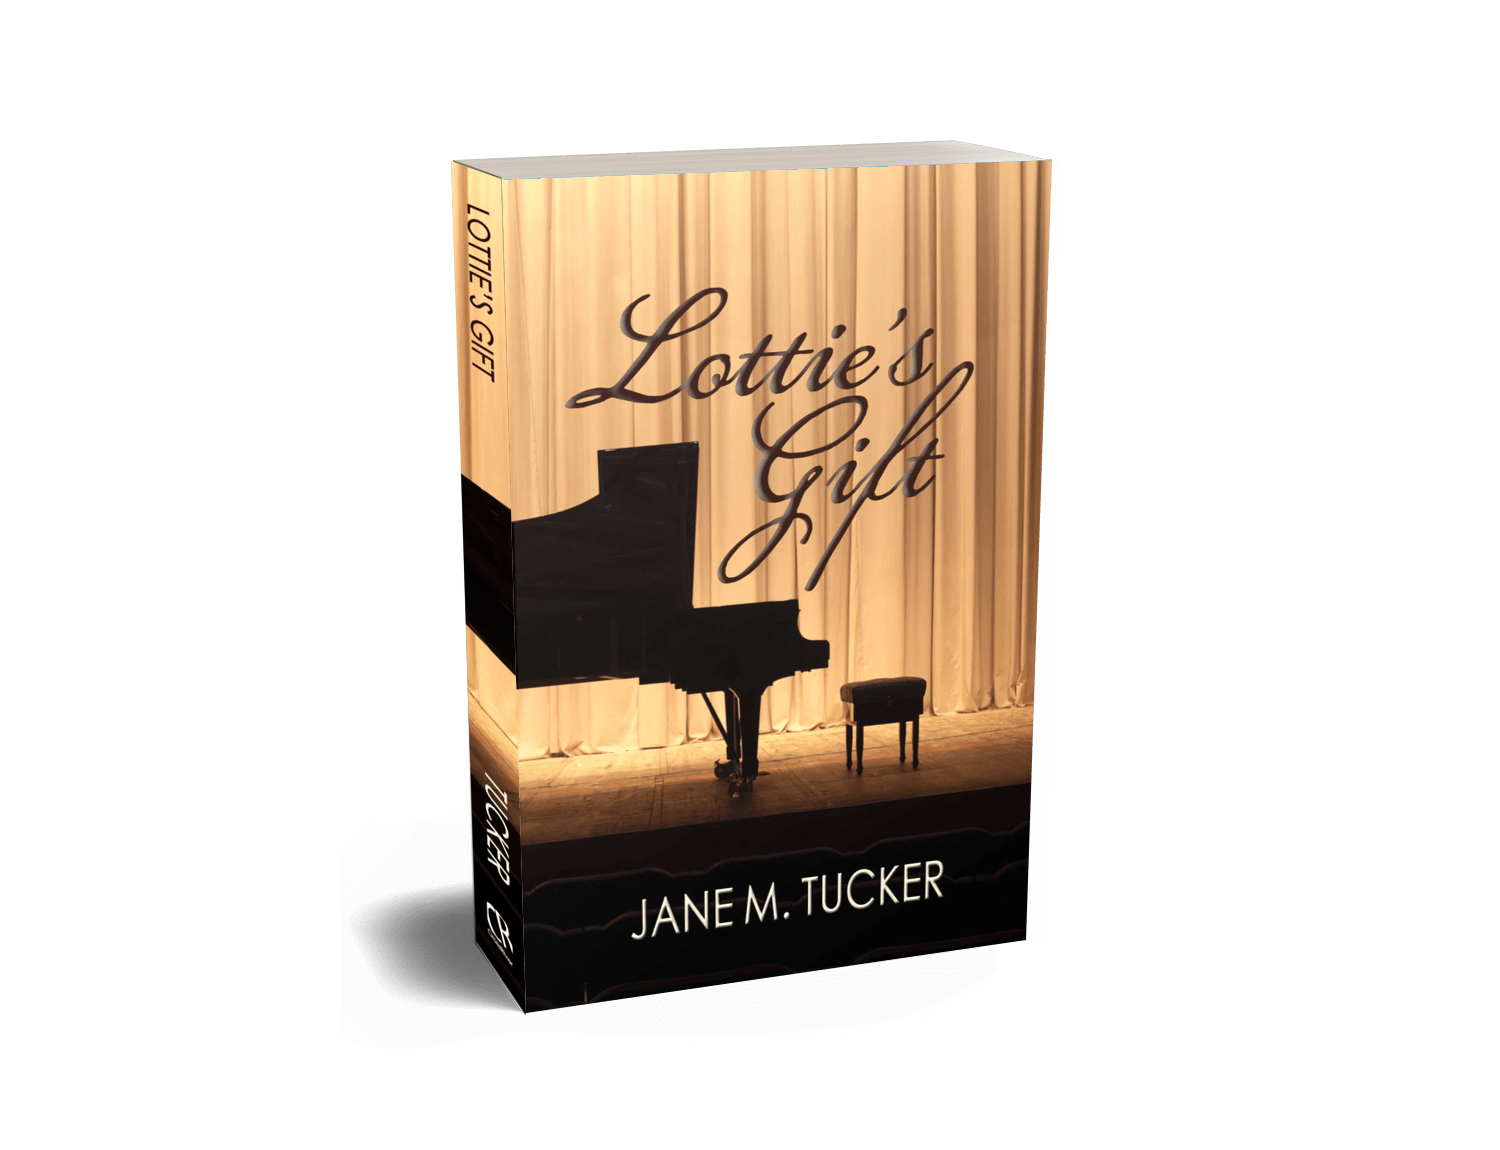 Lotties Gift by Jane Tucker from Christian publisher CrossRiver author